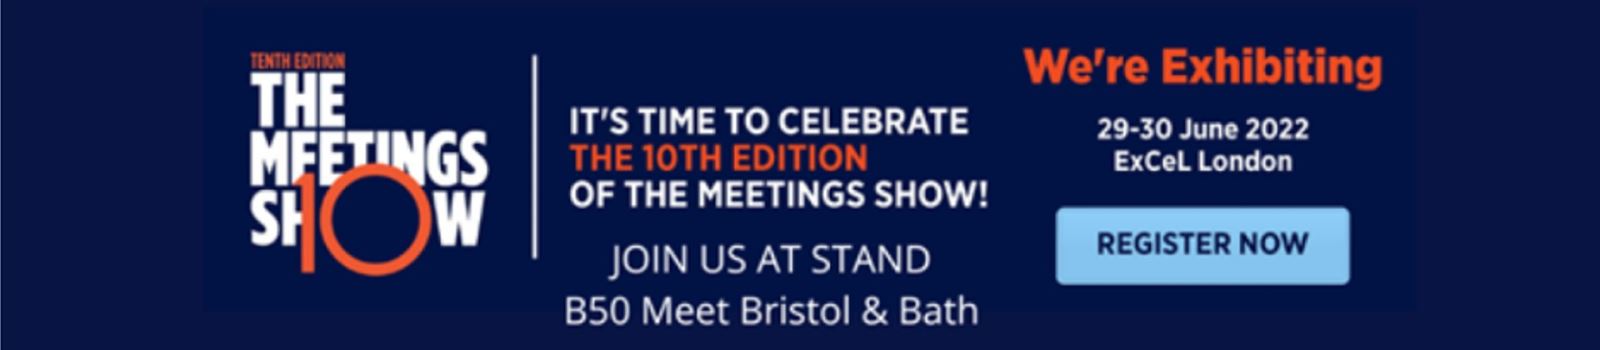 Meet Bristol and Bath at The Meetings Show 2022 info